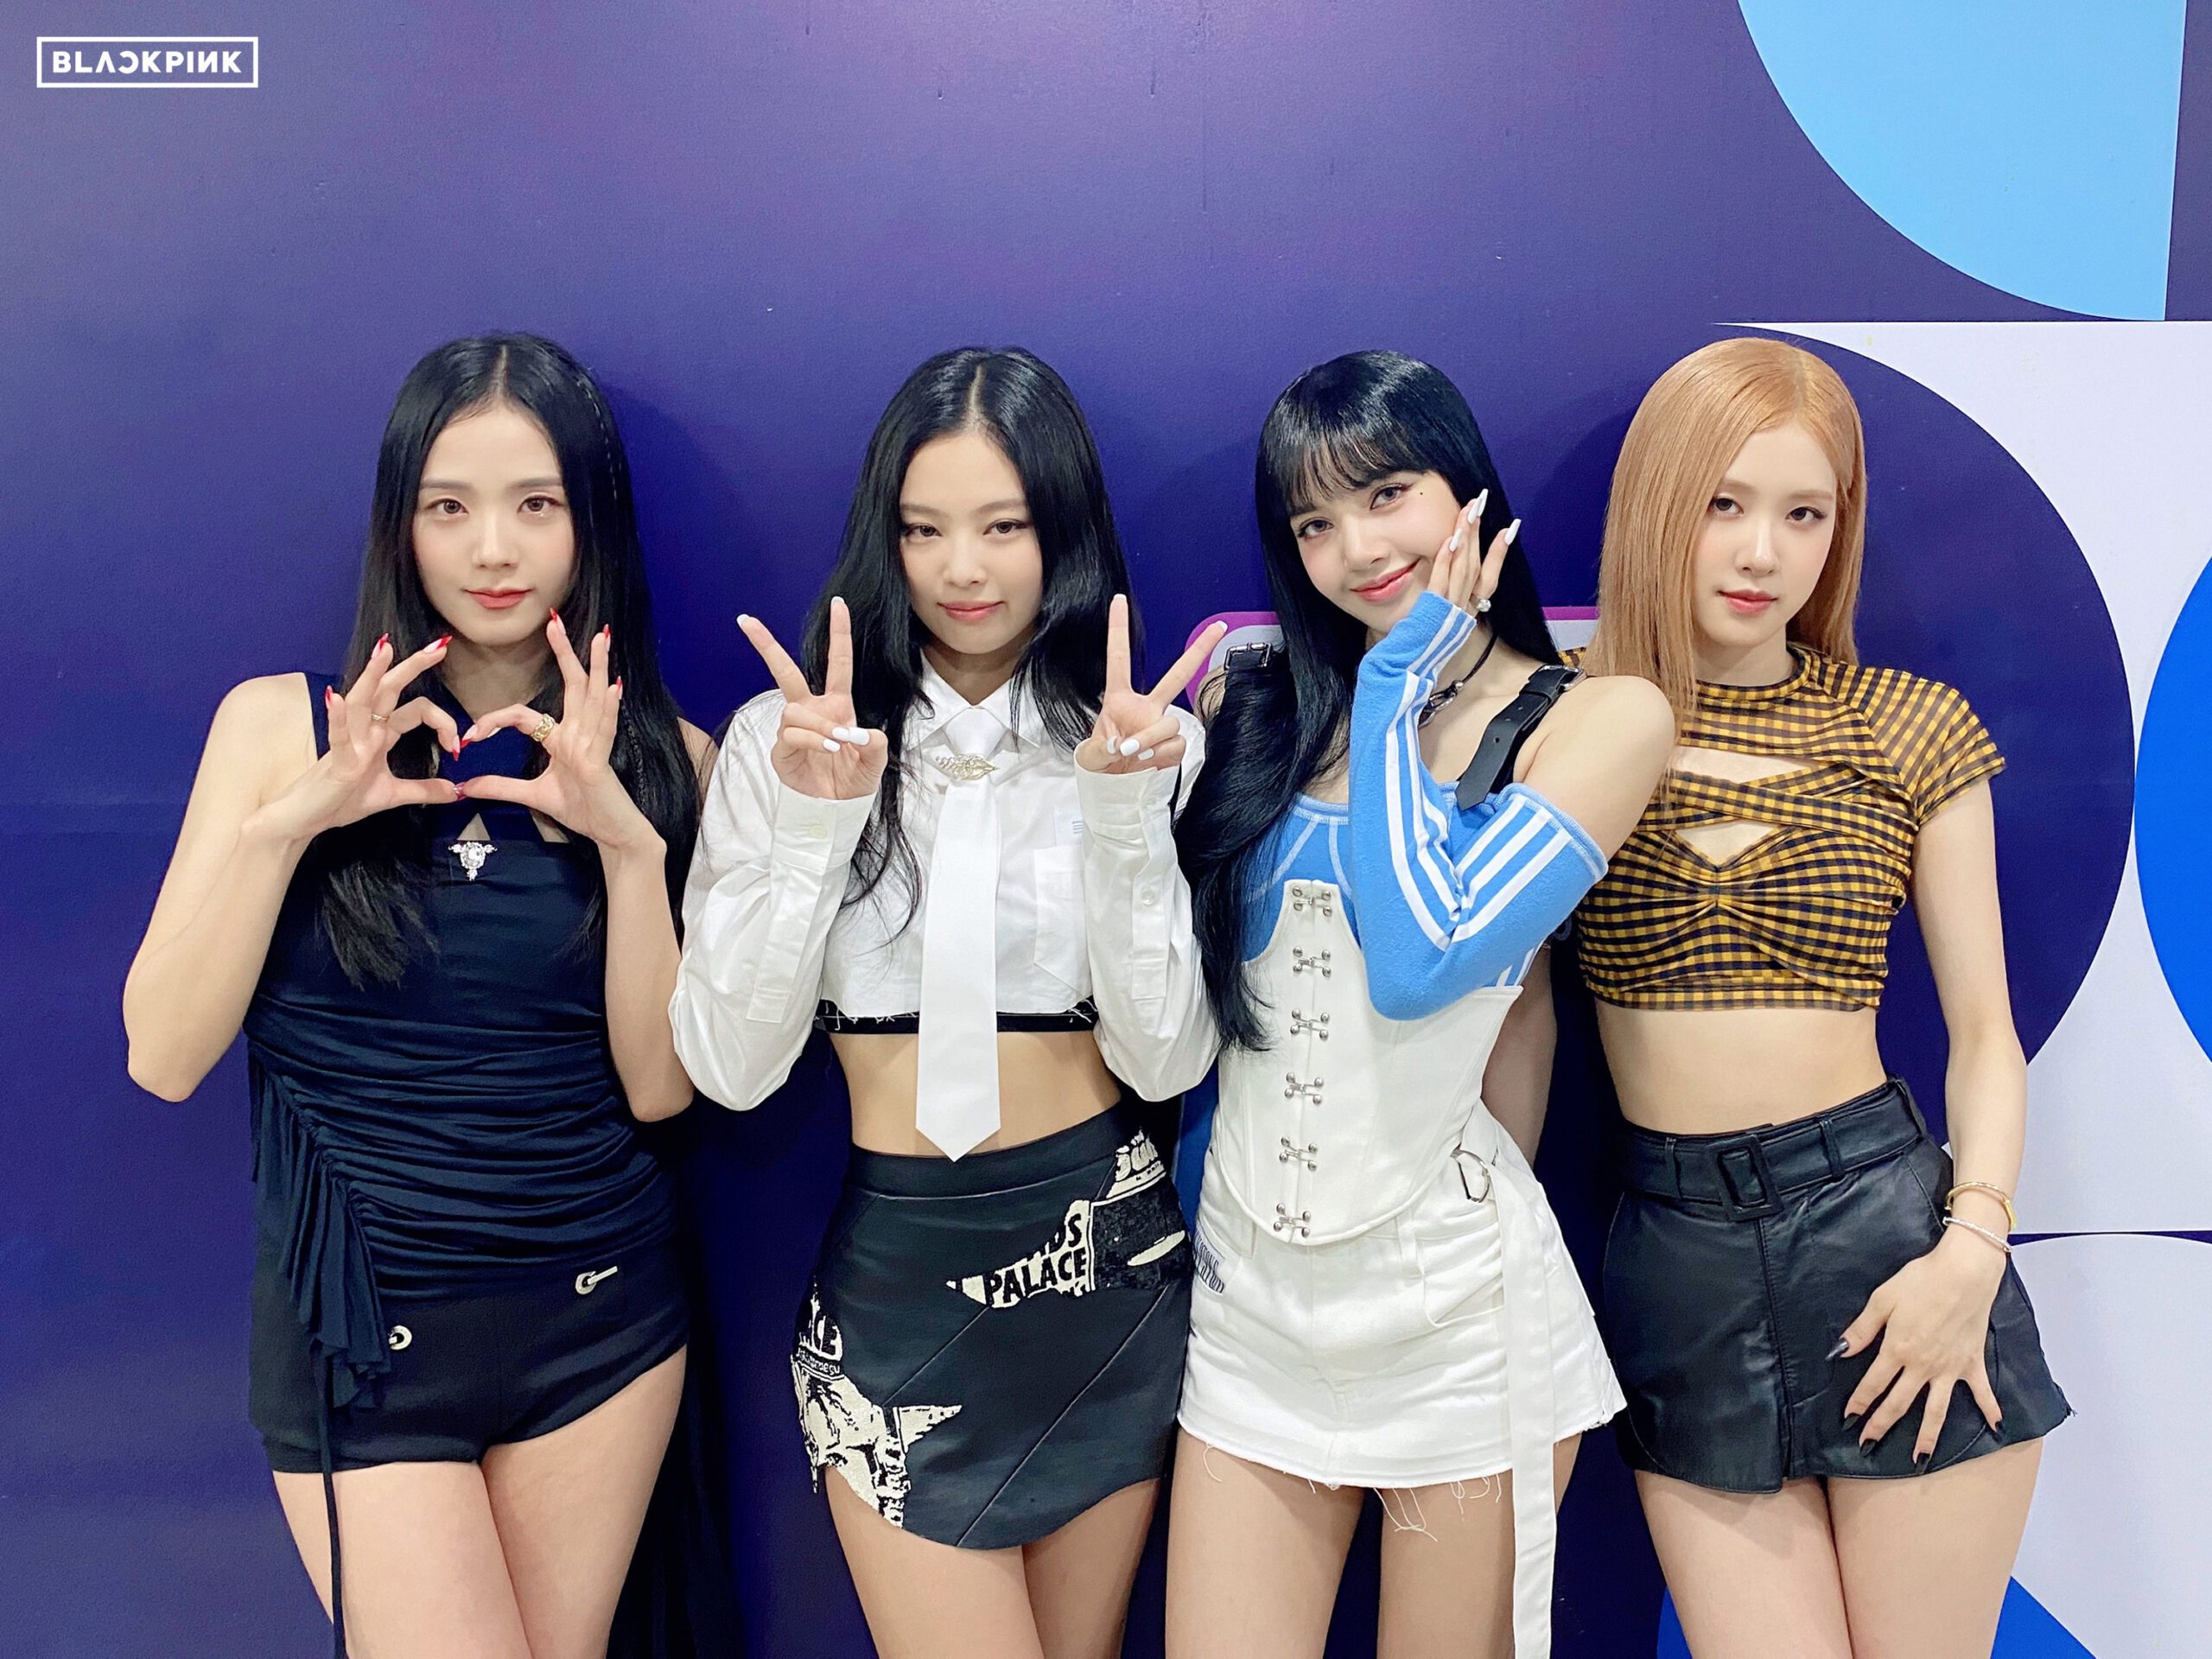 Here’s where you can watch Coachella 2023 online – including BLACKPINK’s set